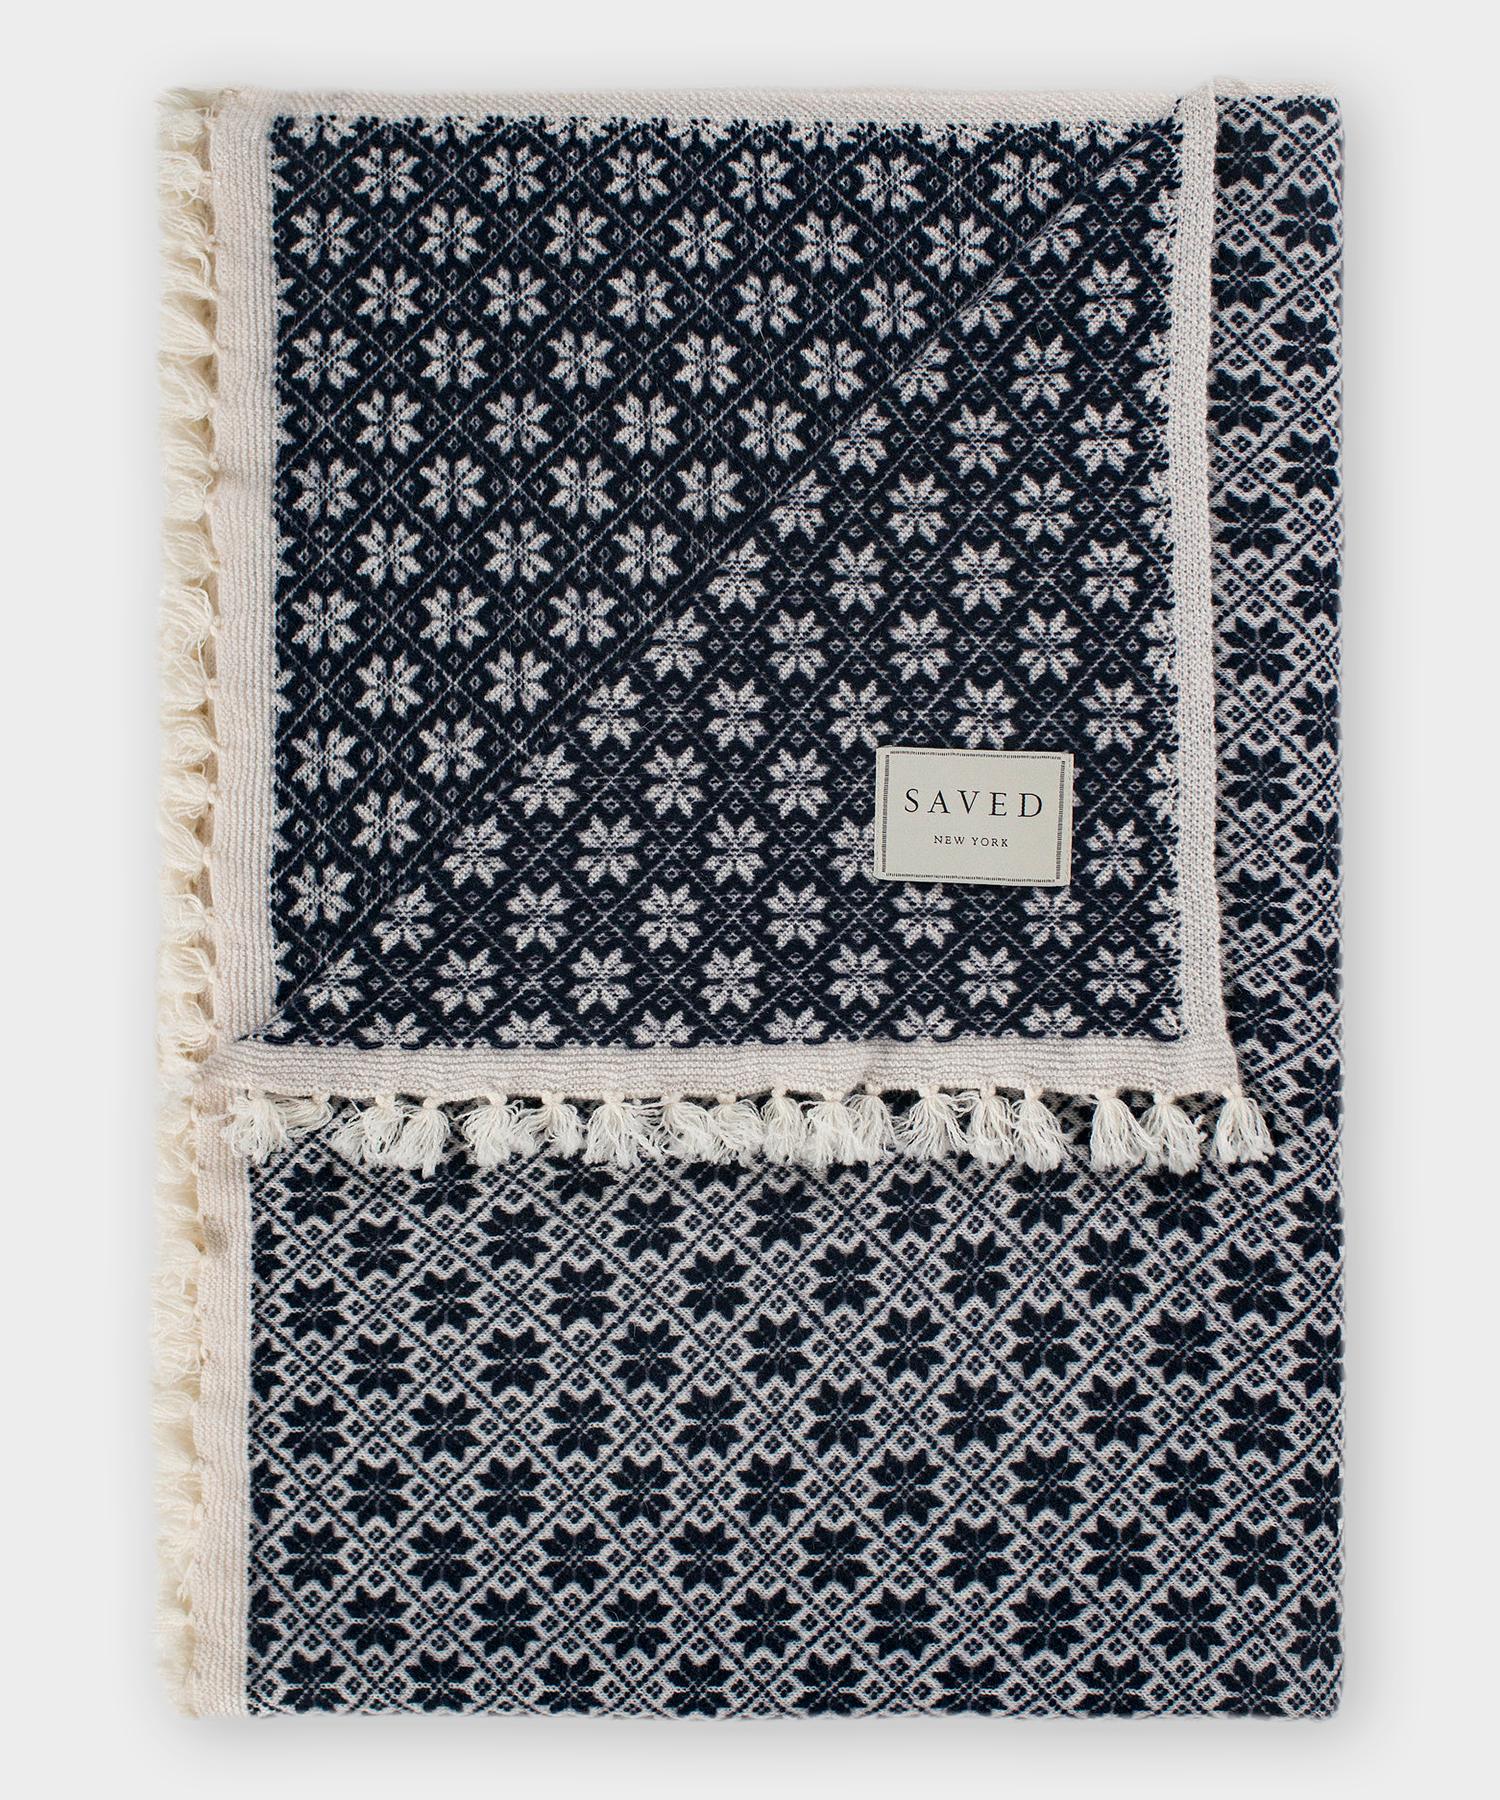 Contemporary Snowflake Blanket by Saved, New York